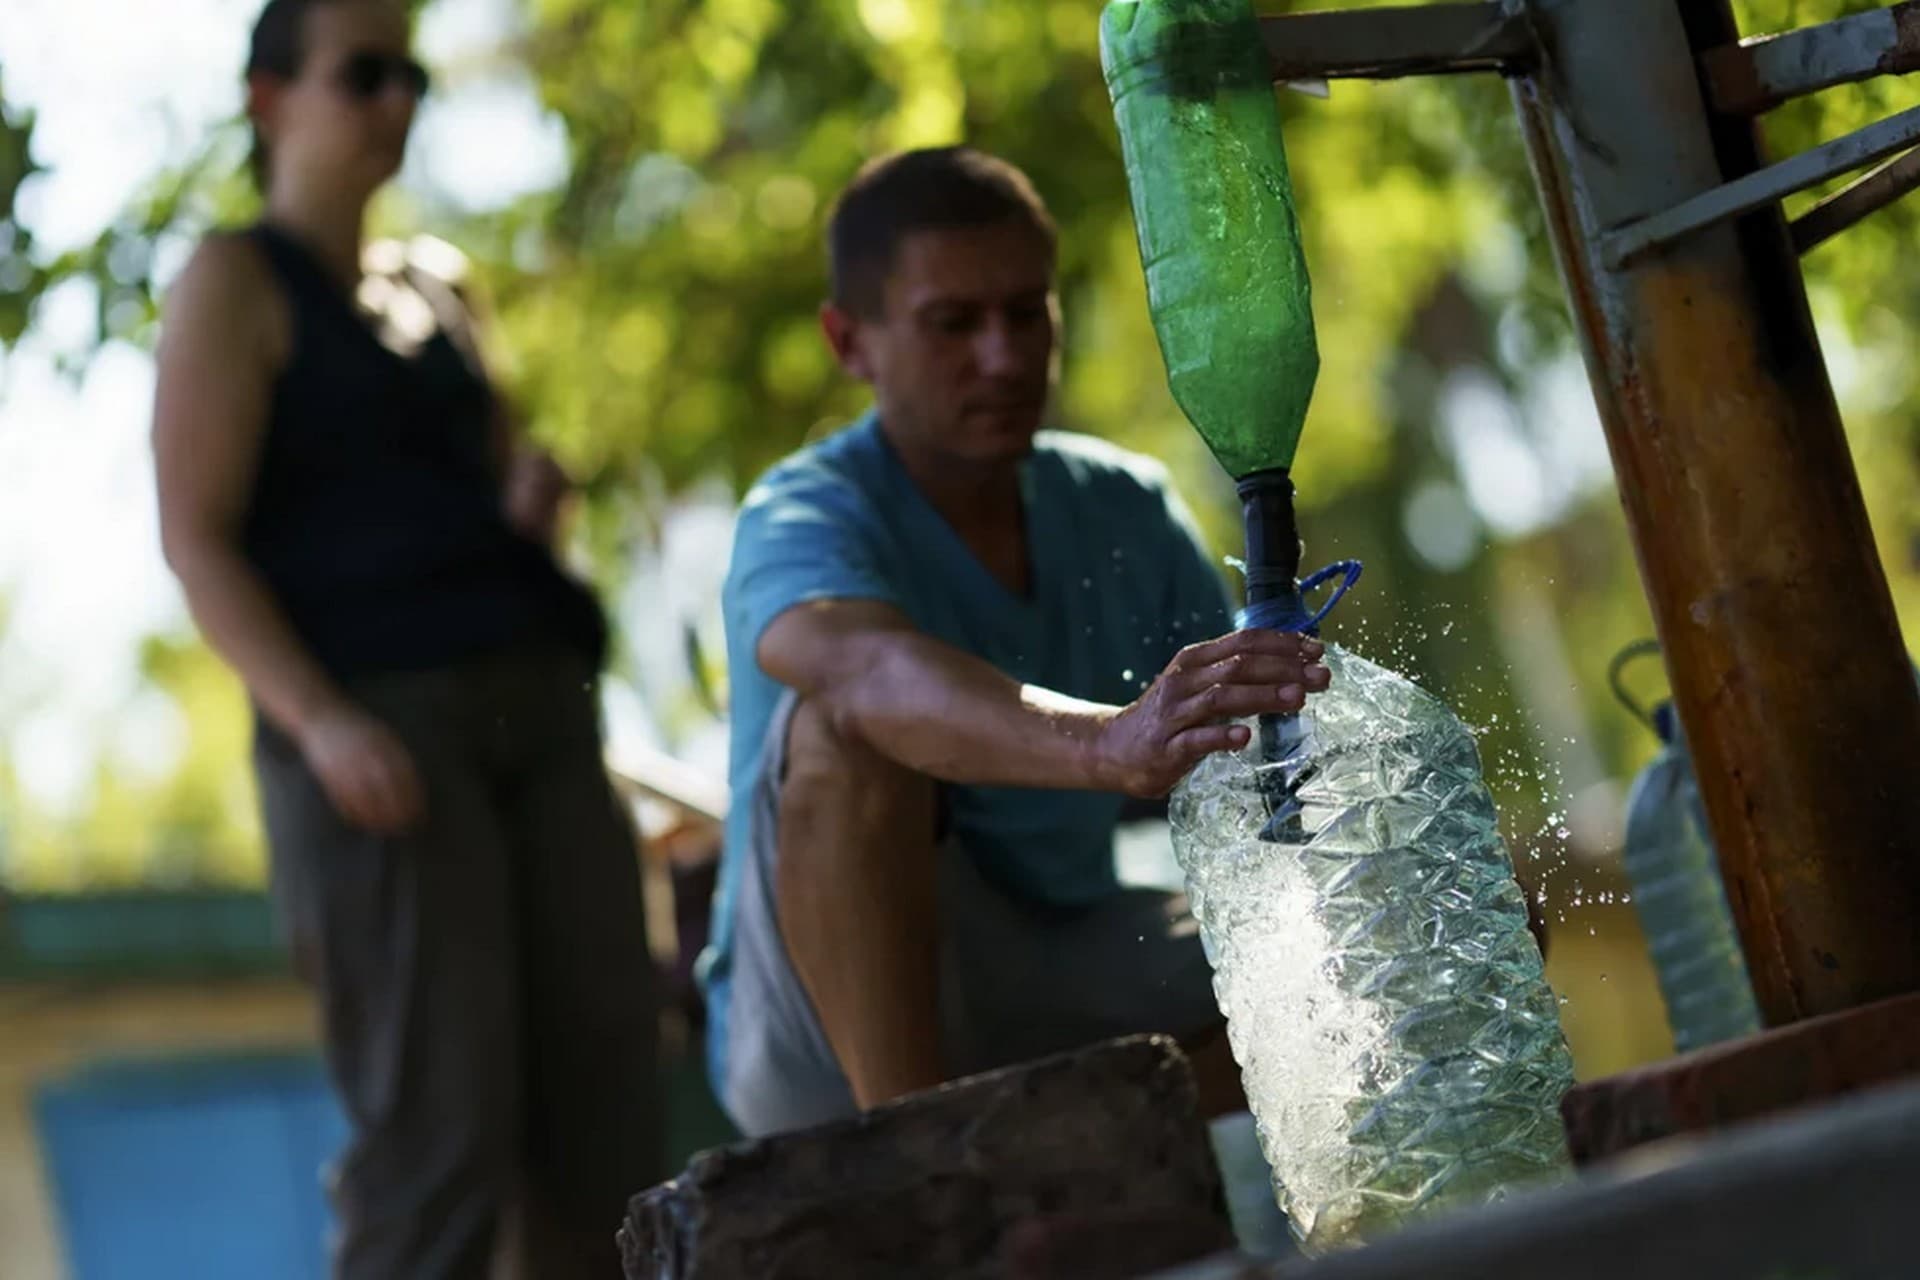 Residents gather to pump water from a well outside an apartment complex in Sloviansk